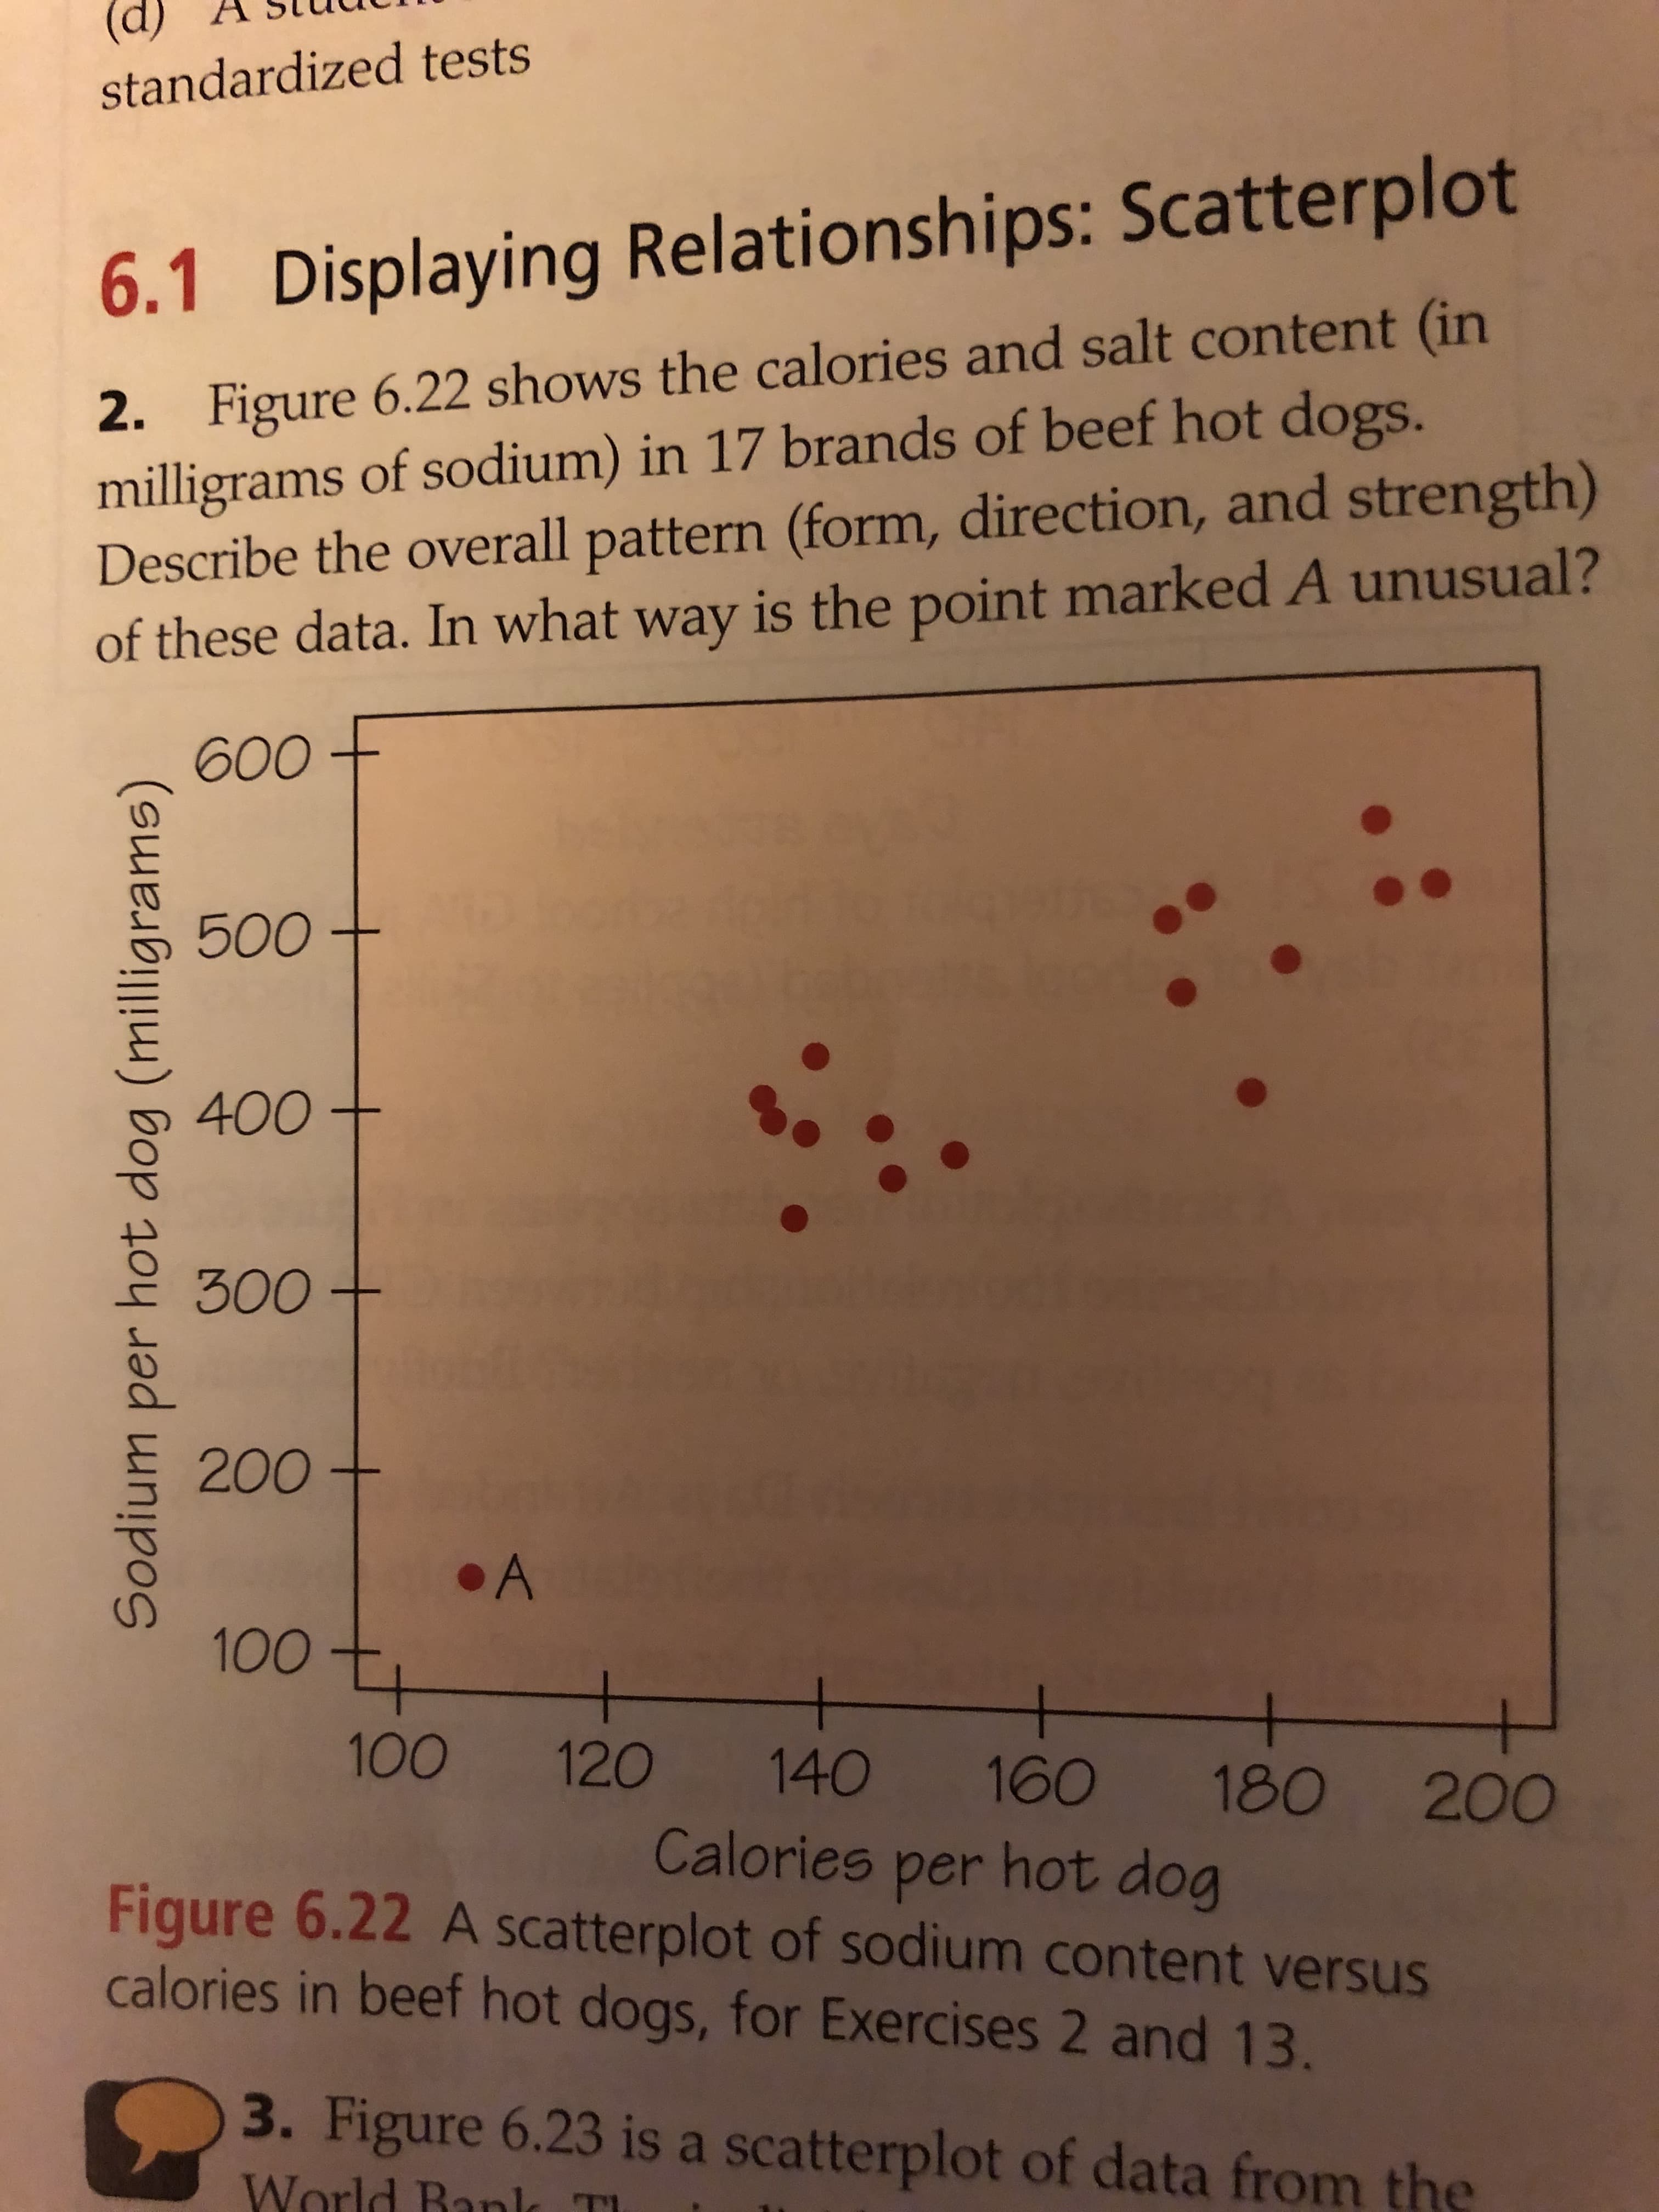 (d)
standardized tests
6.1 Displaying Relationships: Scatterplot
2. Figure 6.22 shows the calories and salt content (in
milligrams of sodium) in 17 brands of beef hot dogs.
Describe the overall pattern (form, direction, and strength)
of these data. In what way is the point marked A unusual?
600
500
400
300
200
A
100
100
120
140
160
Calories per hot dog
Figure 6.22 A scatterplot of sodium content versus
180 200
calories in beef hot dogs, for Exercises 2 and 13.
3. Figure 6.23 is a scatterplot of data from the
World Banl
Sodium
per
hot dog (milligrams)
